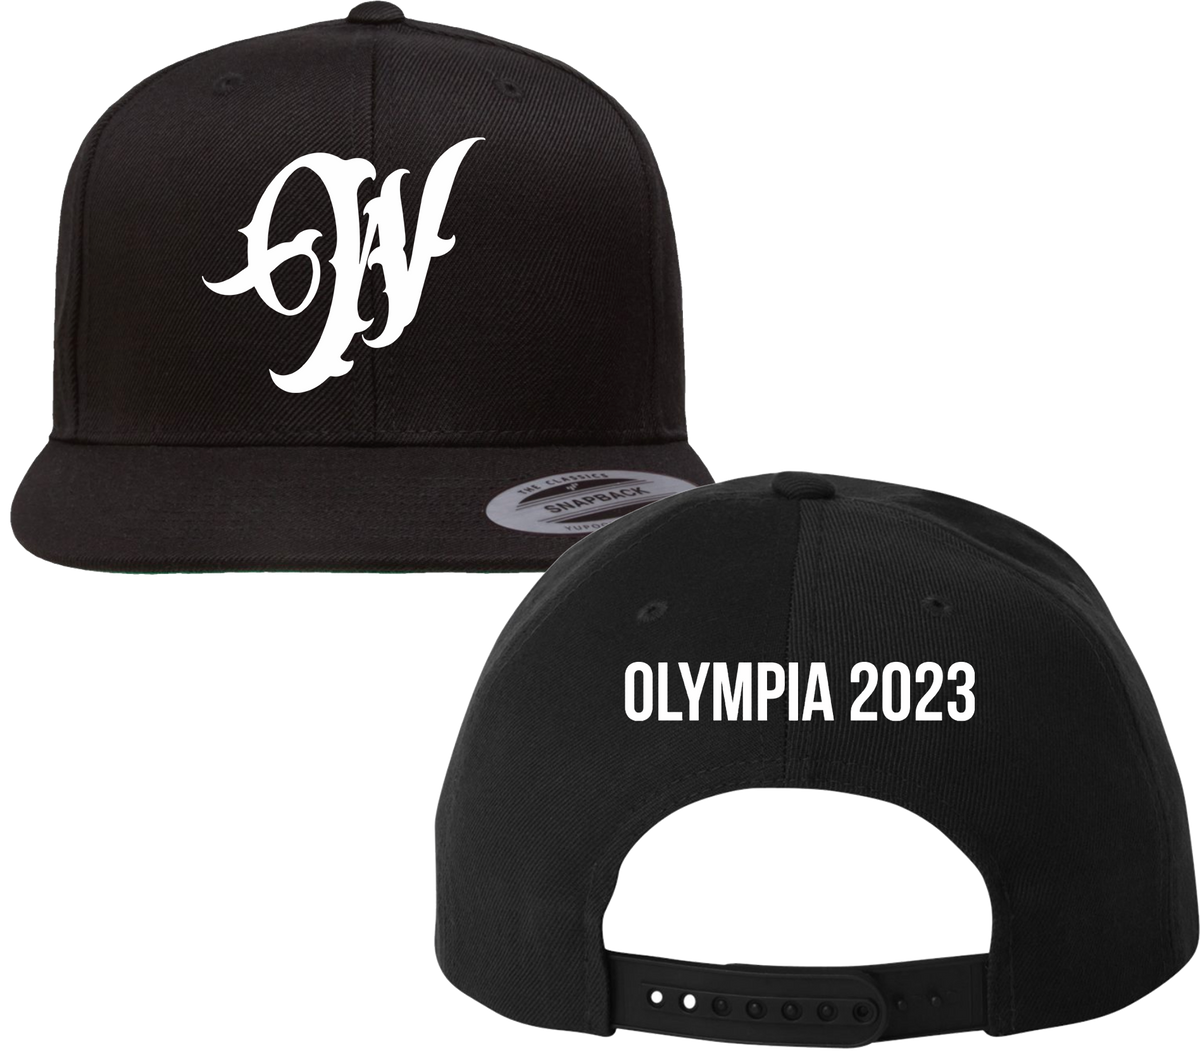 WYCKED APPAREL SNAP BACK HAT - OLYMPIA 2023 - WHITE ON BLACK